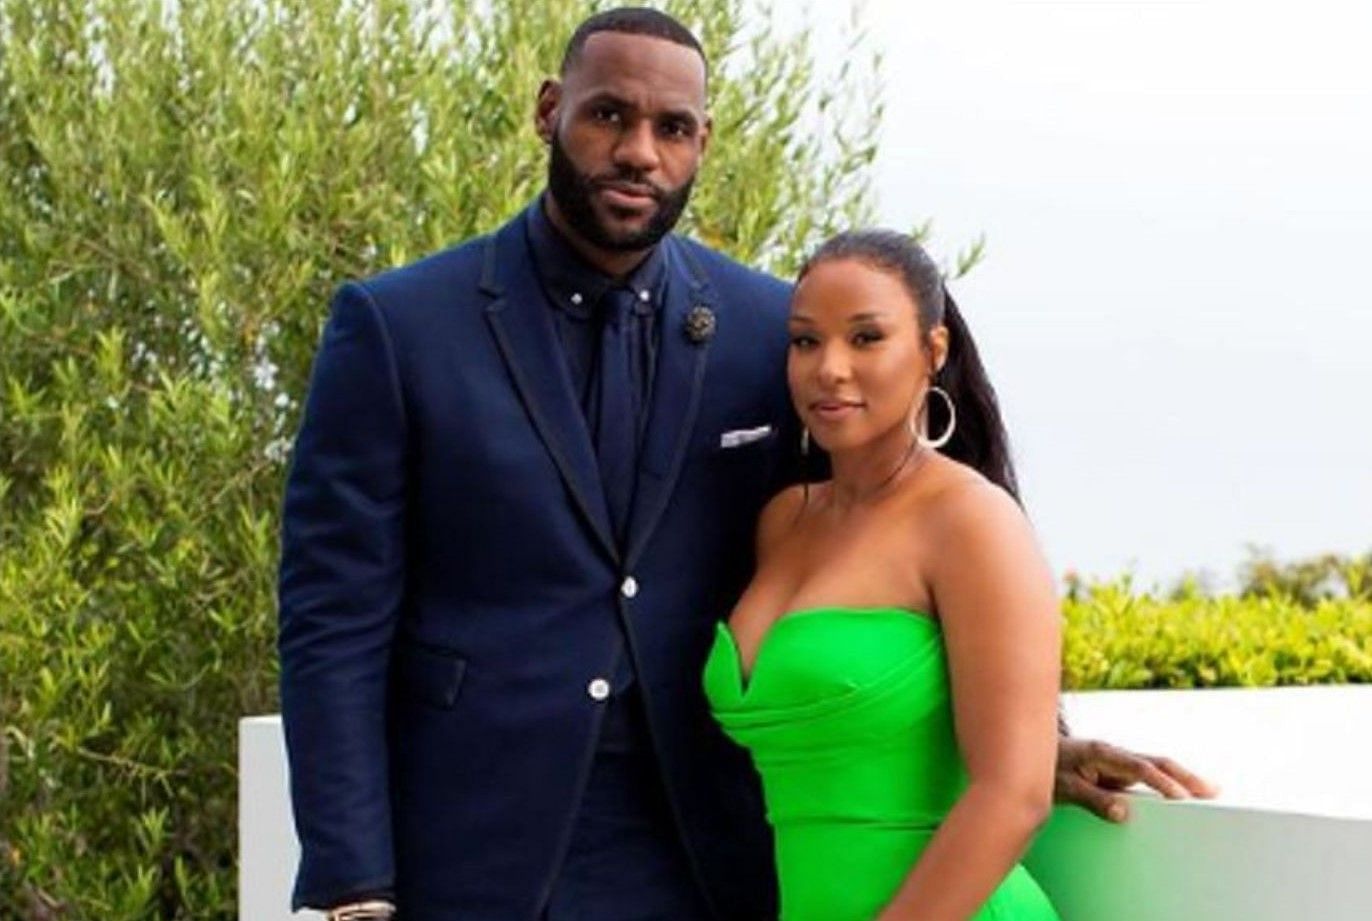 Savannah James was emotional over the closure of the steakhouse where she and LeBron James had their first date.